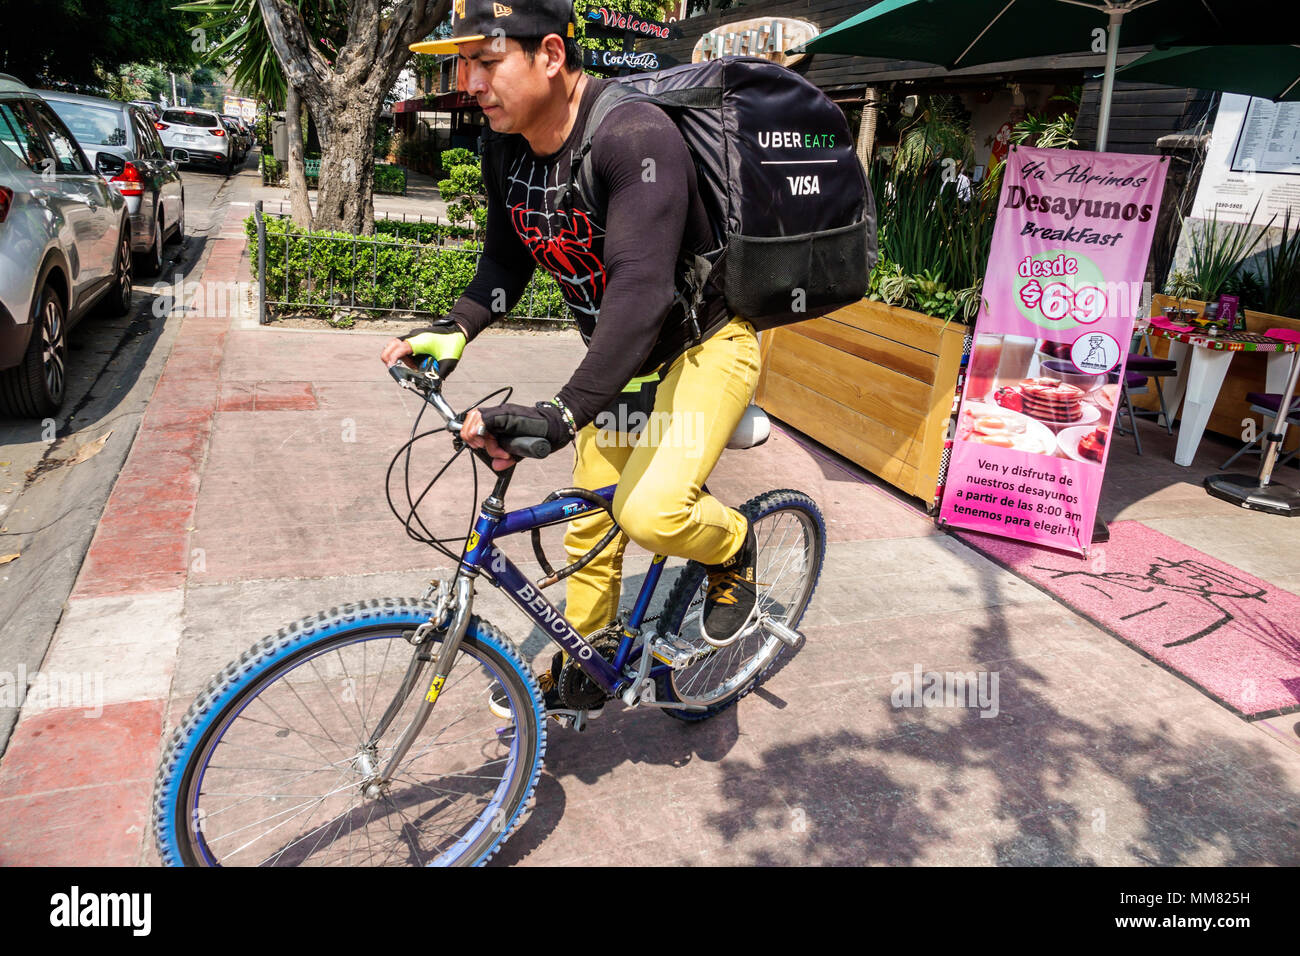 Mexico City,Polanco,Hispanic,immigrant immigrants,Mexican,man men male,delivery boy,Uber Eats,bicycle bicycles bicycling riding biking rider riders bi Stock Photo